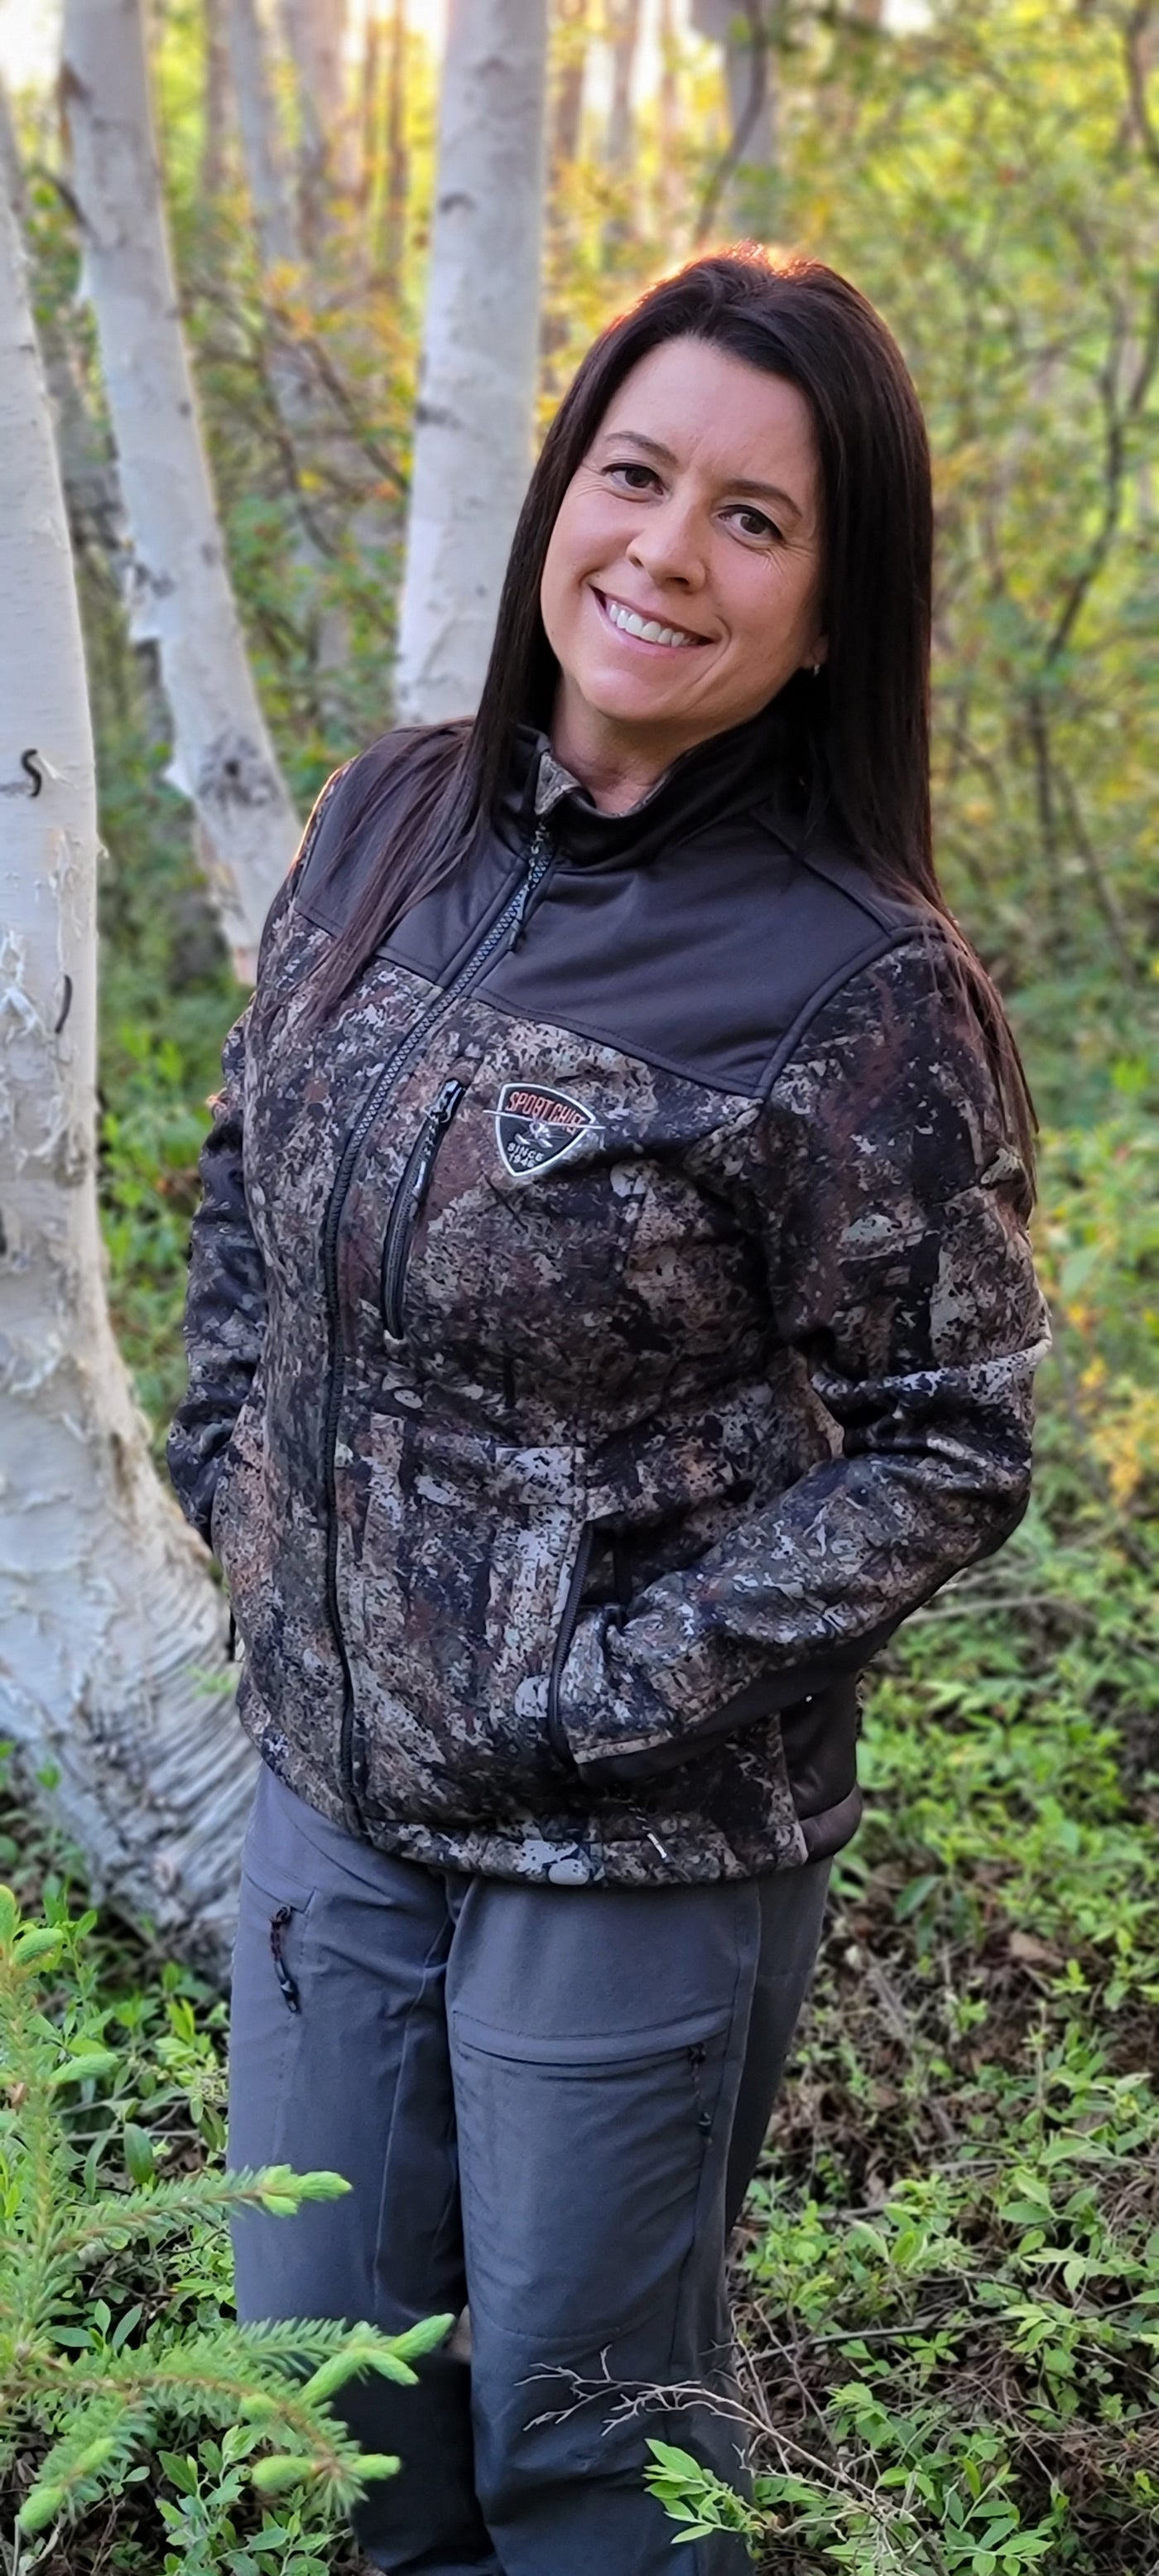 Jacket "Rode-liner" woman camo "The Ripper"